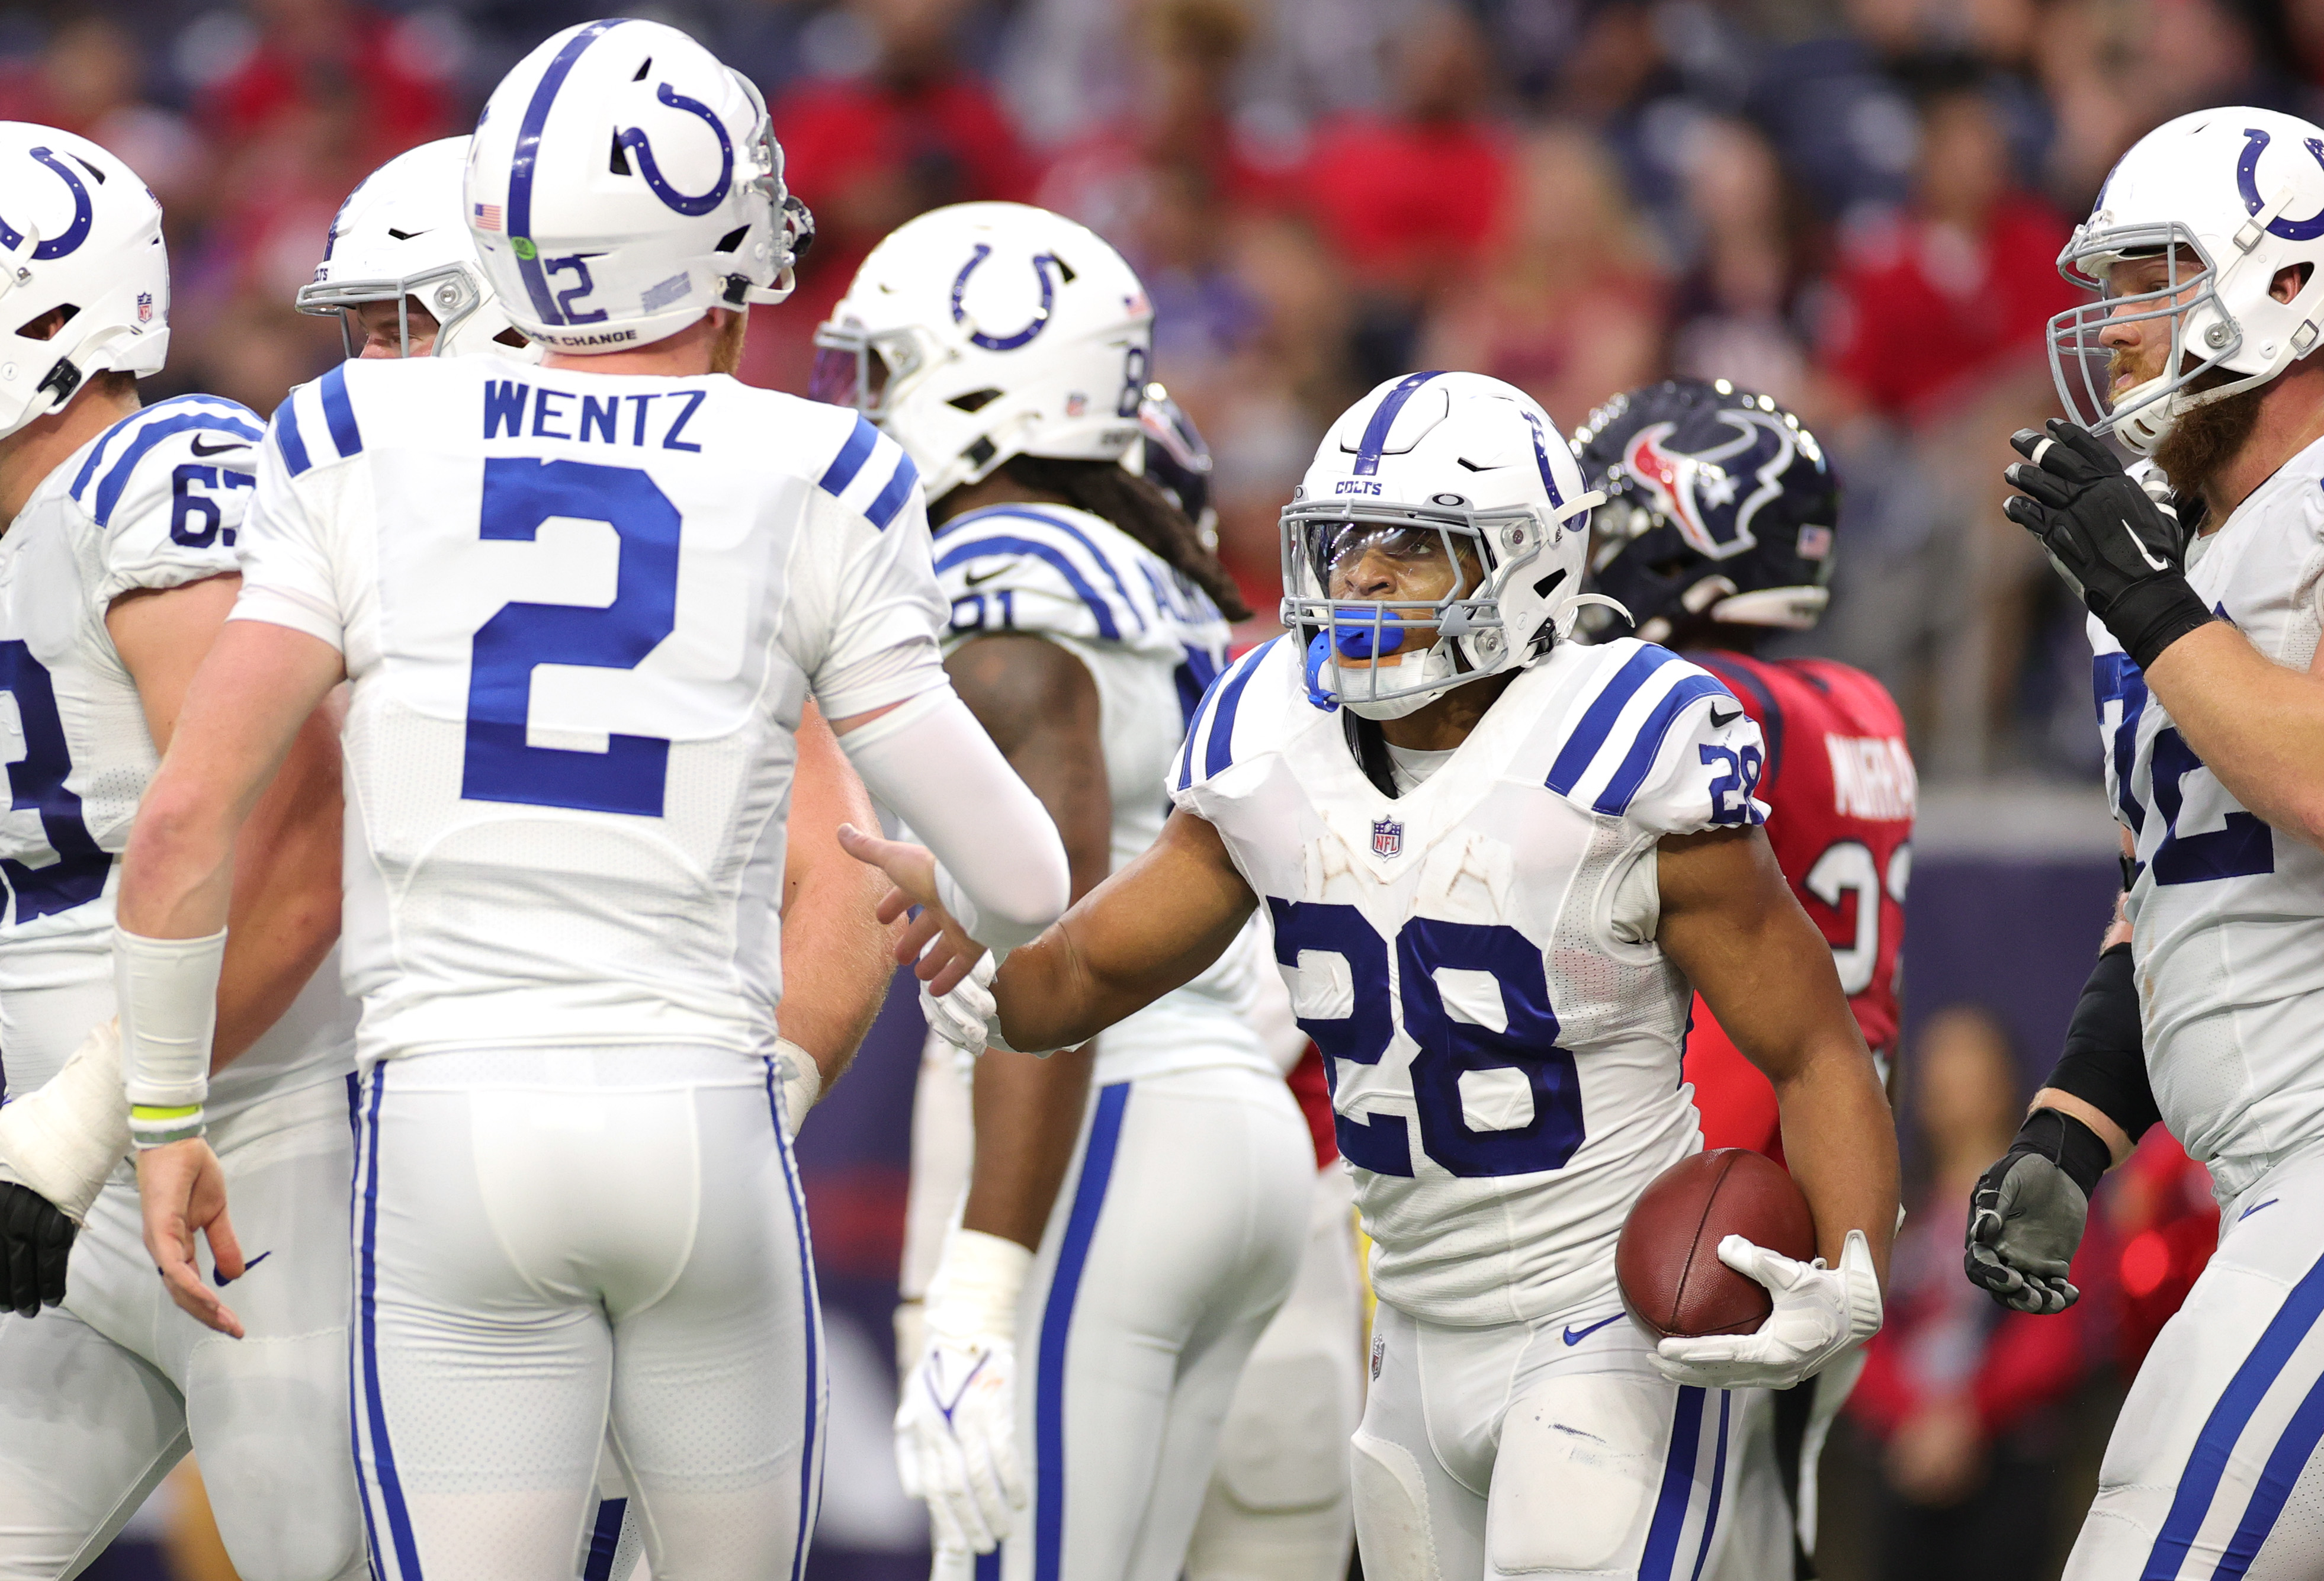 The Colts can clinch a playoff spot in Week 17.